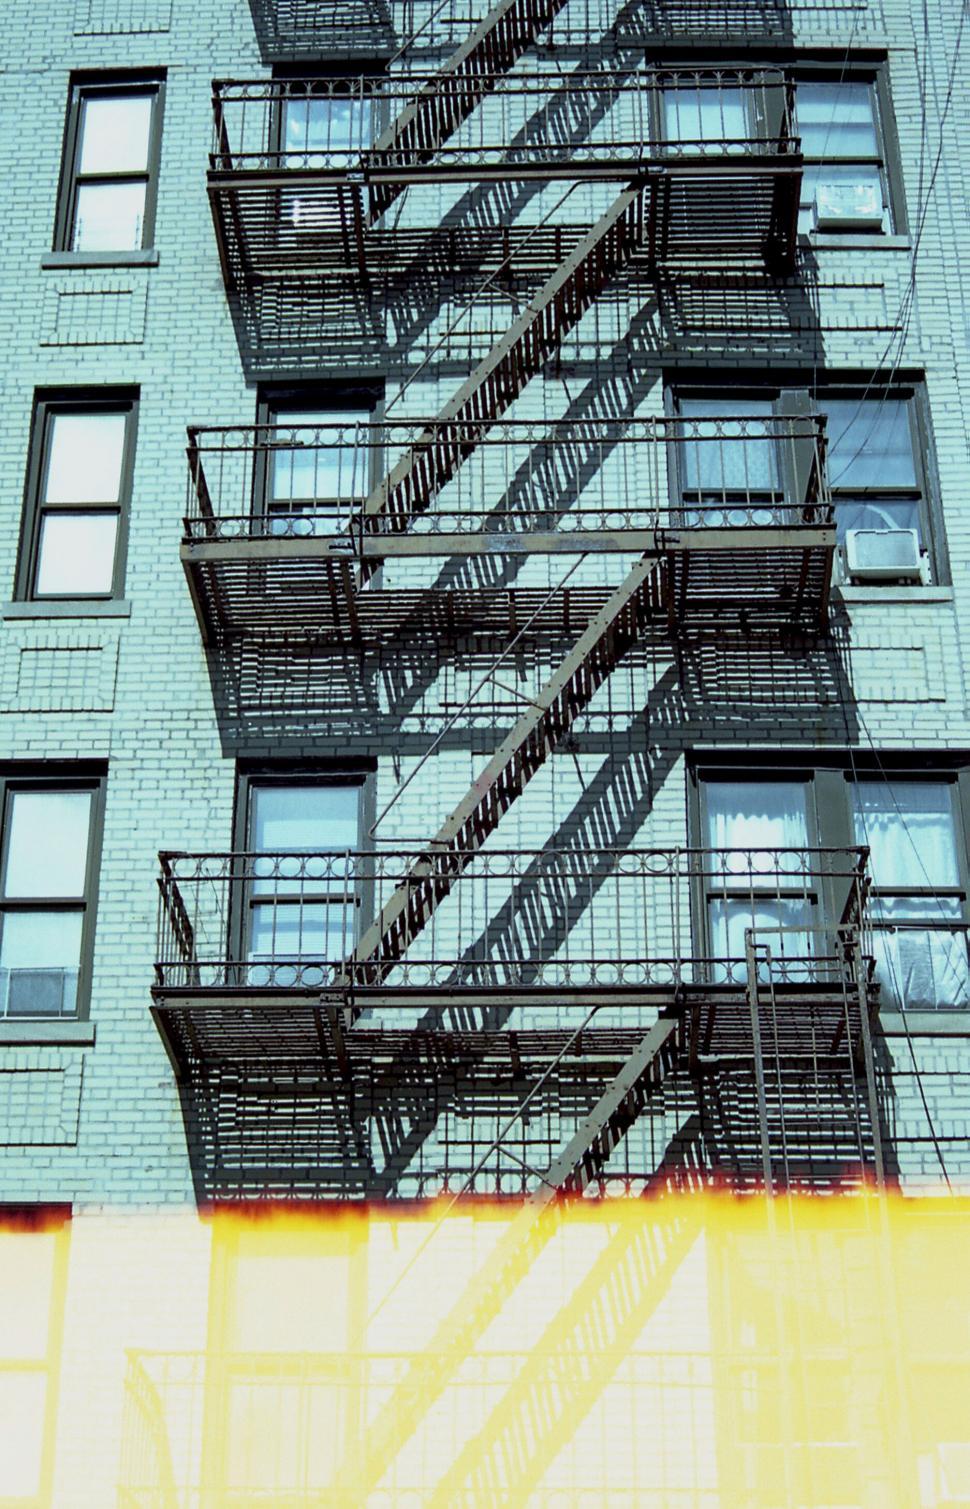 Free Image of Fire escape on a vintage brick building 